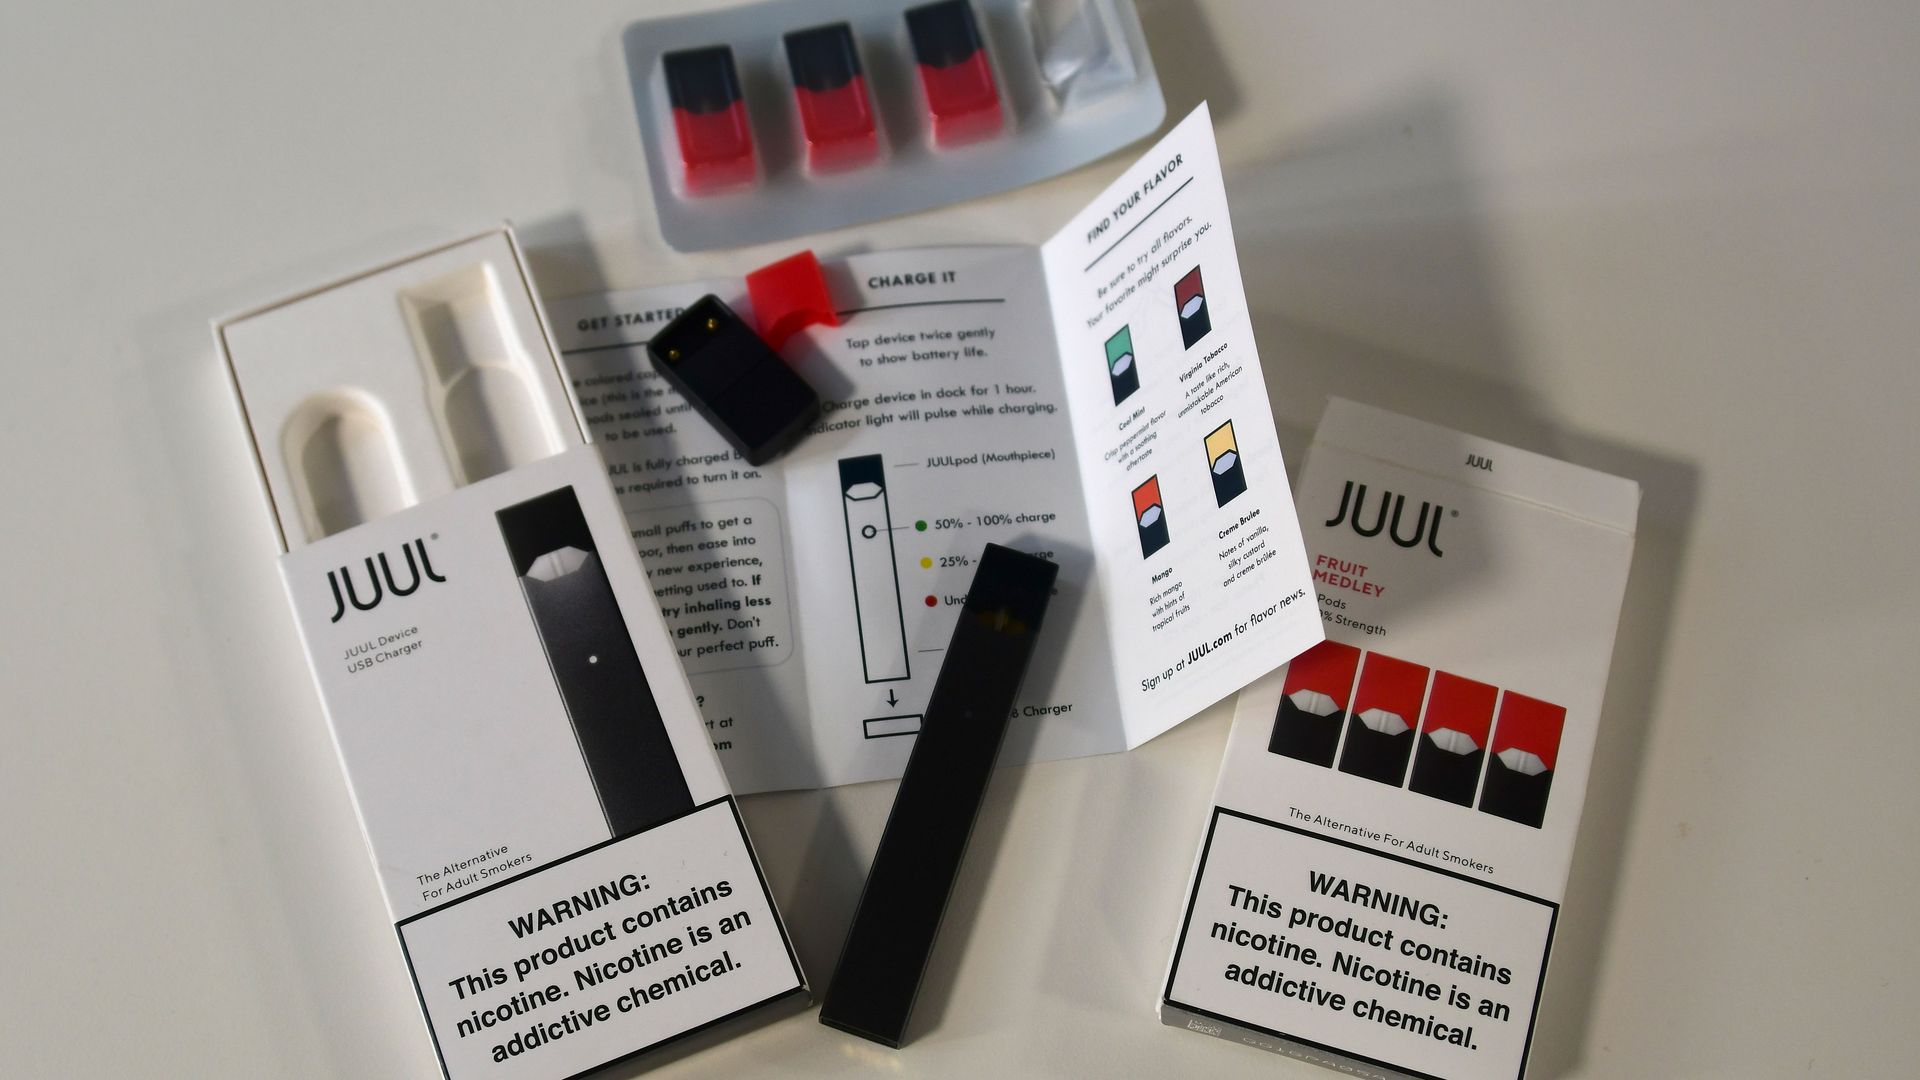 In this image, a Juul kit is unpacked and displayed.